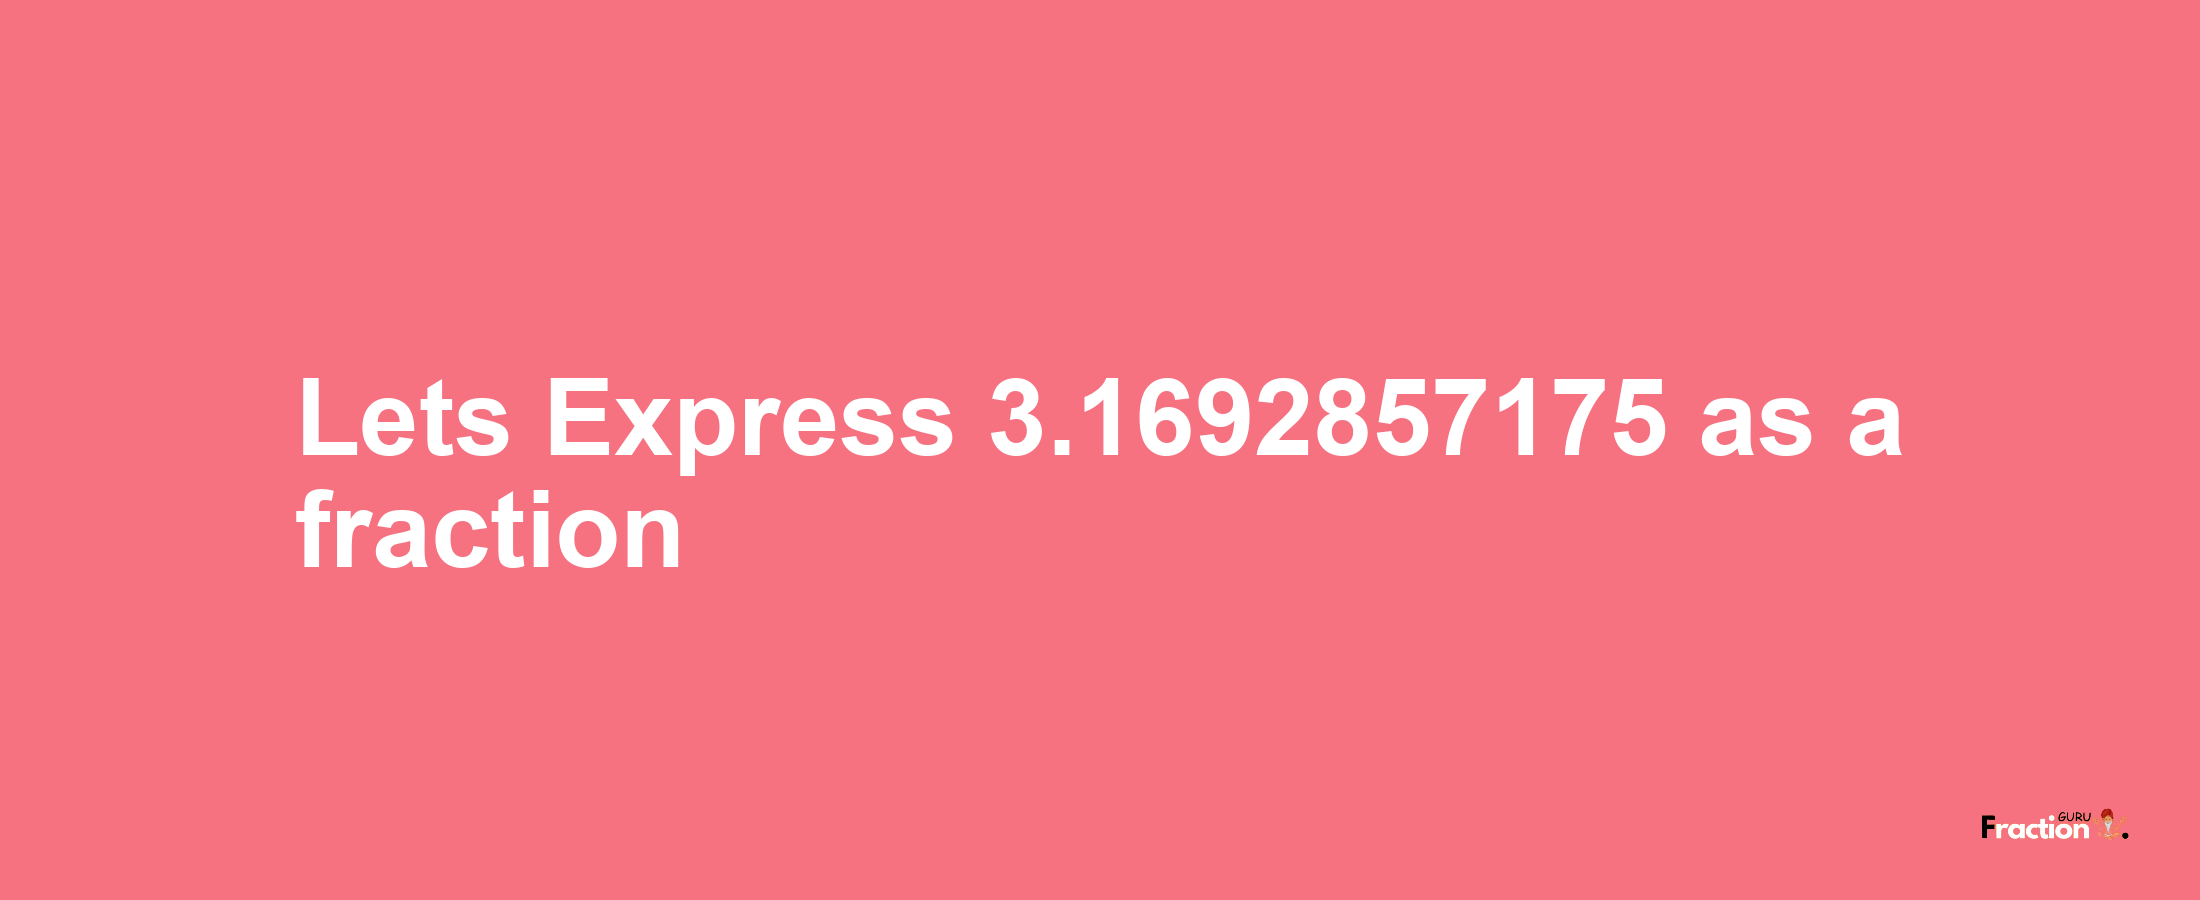 Lets Express 3.1692857175 as afraction